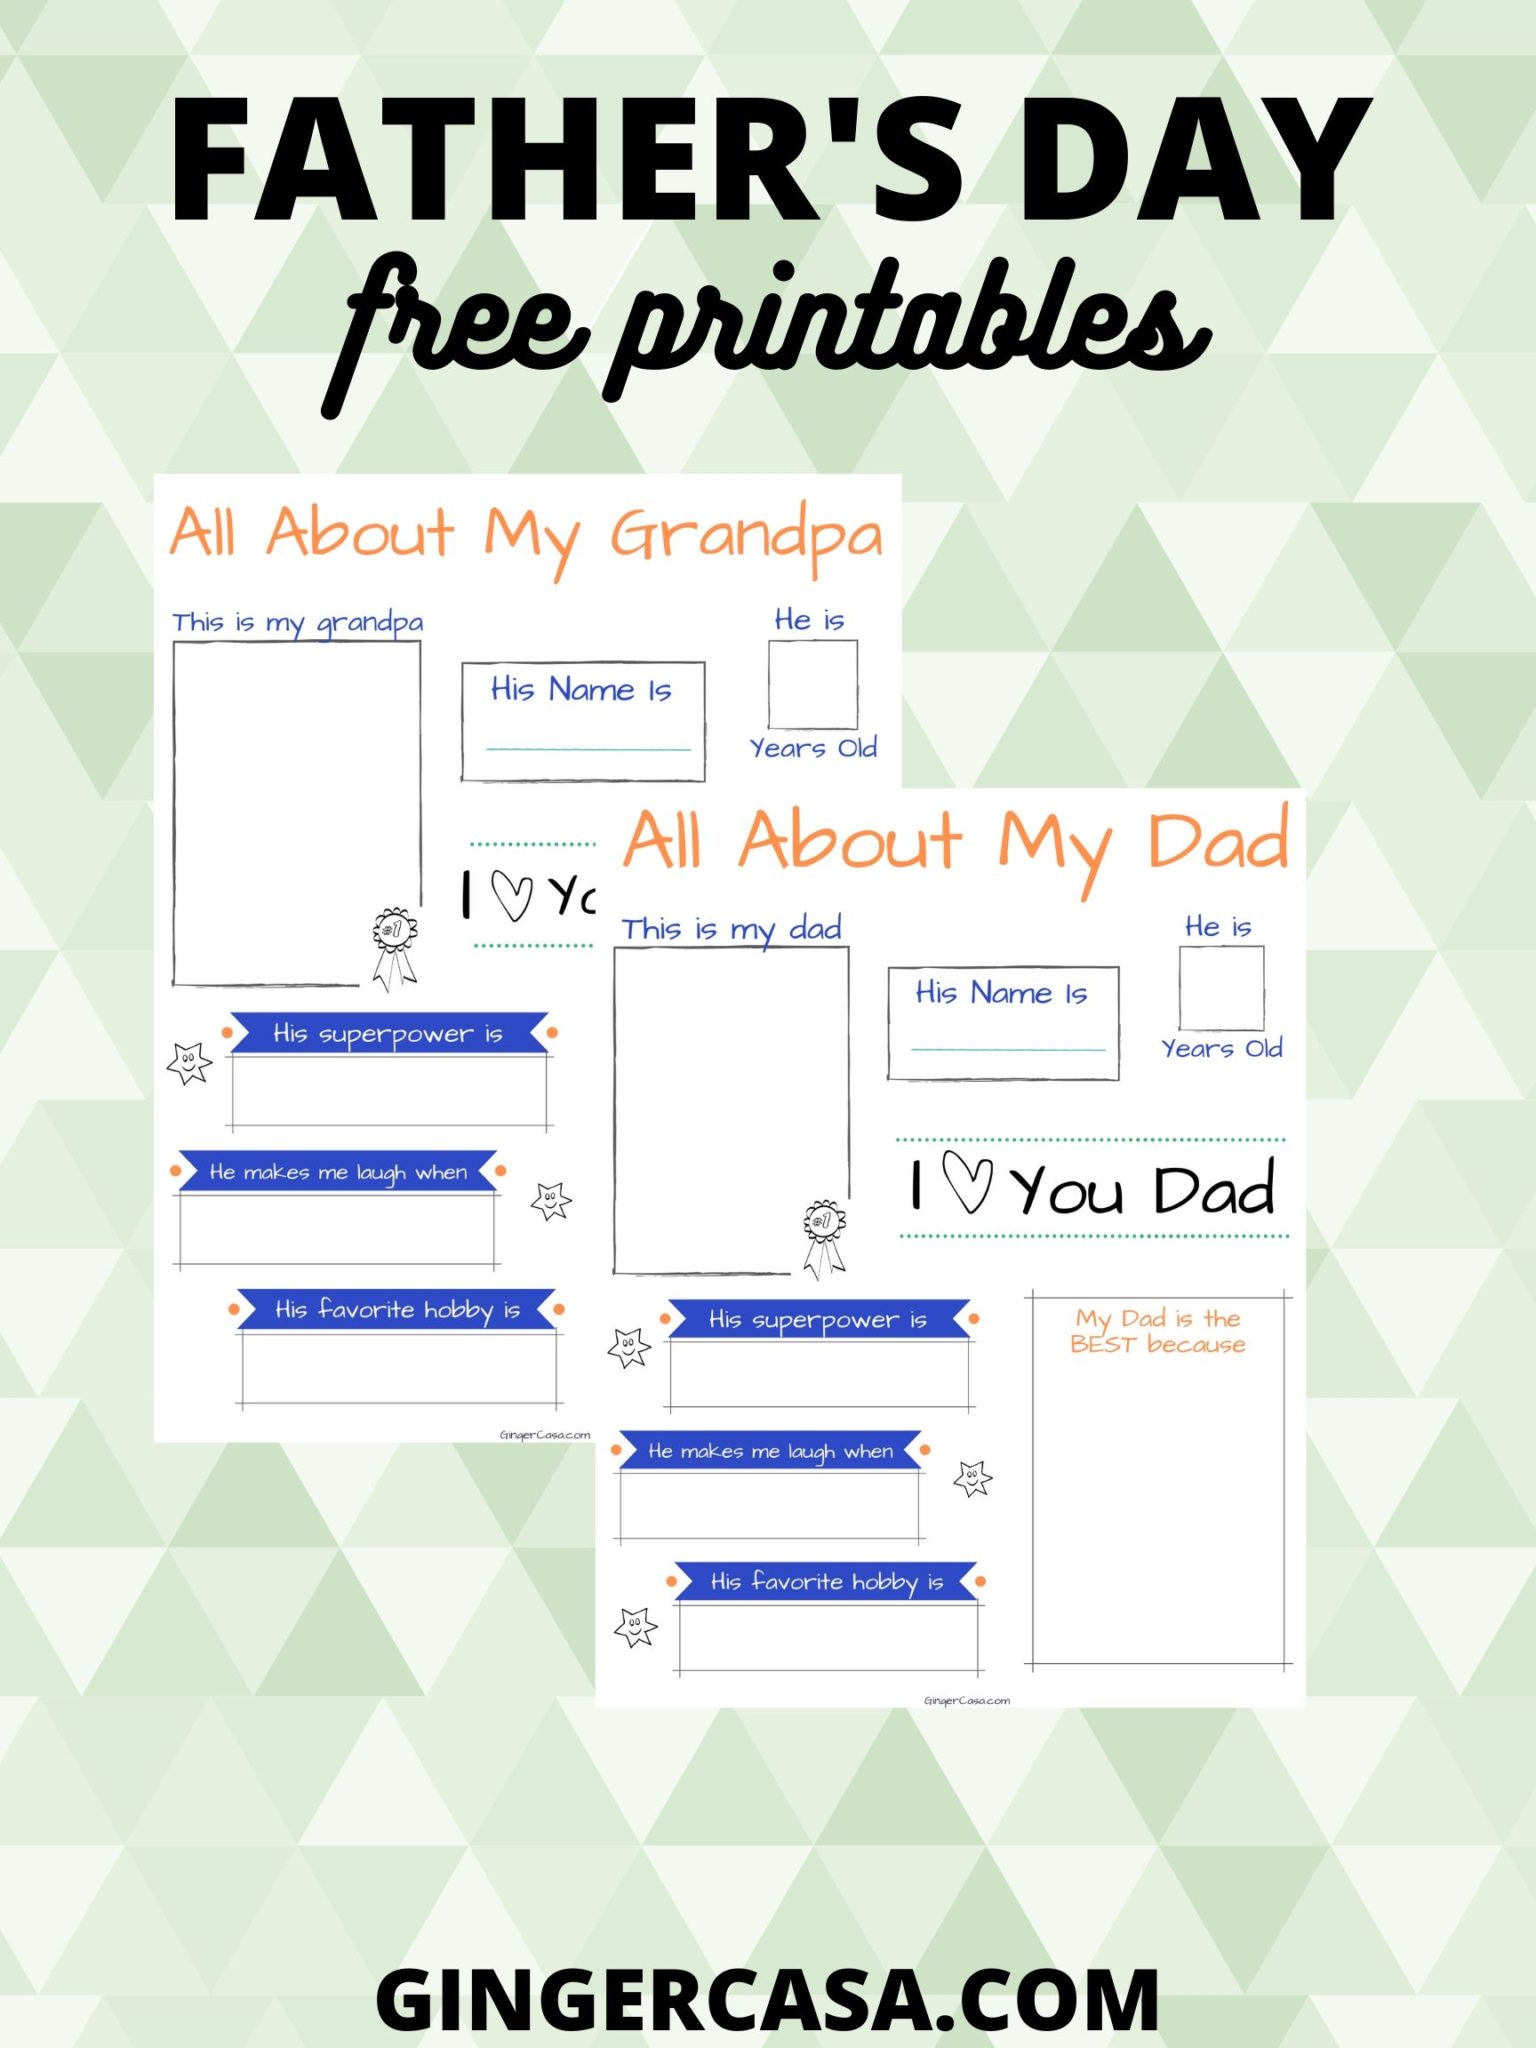 Fun Father's Day Printables - Dad and Grandpa Fact Sheets